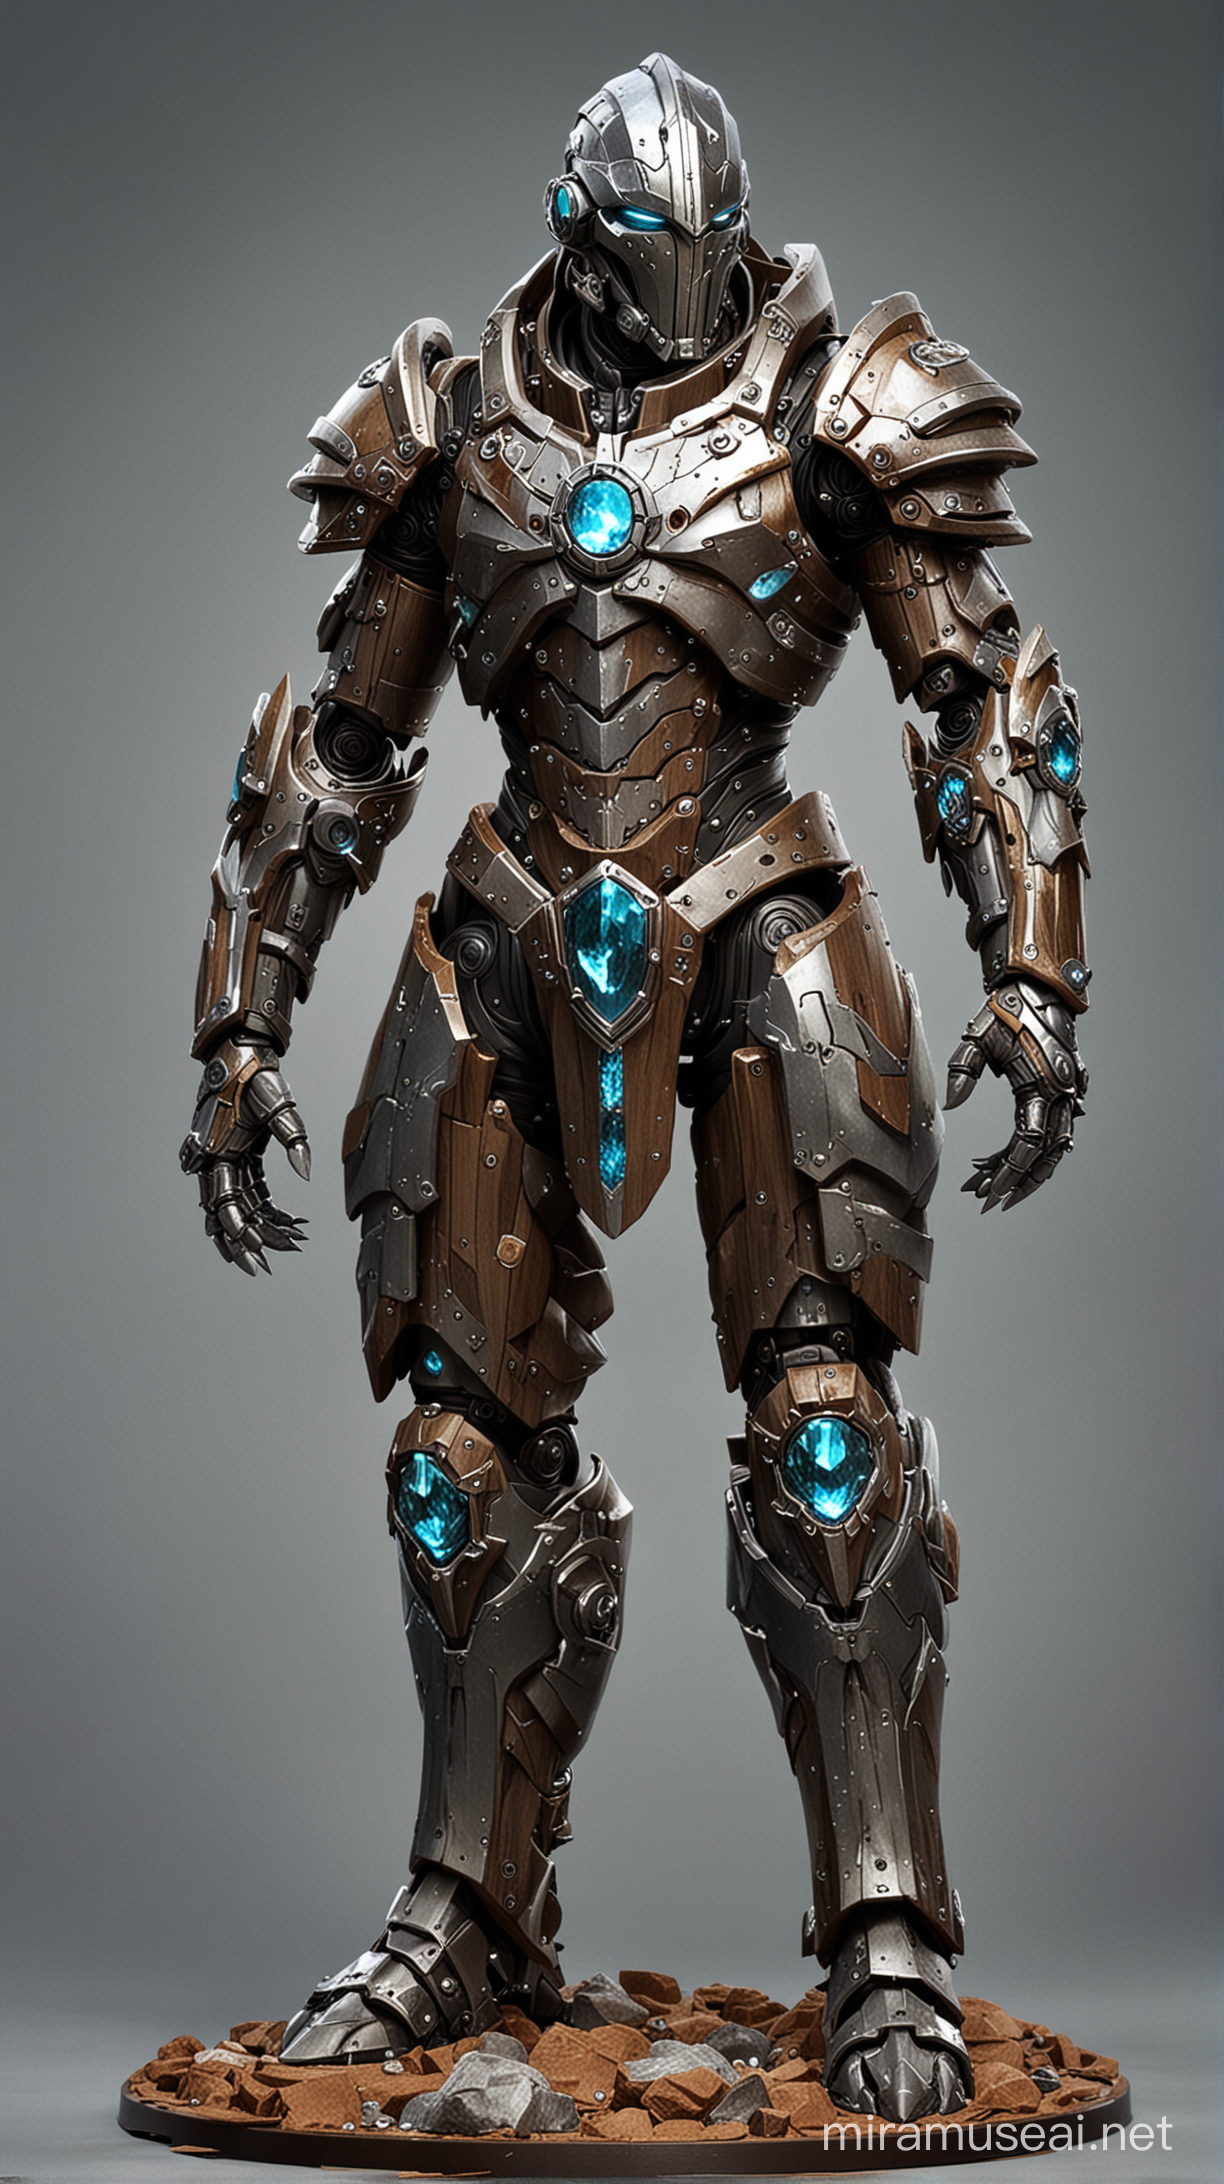 I need an image for a warforged, made by wood and scraps of metal and powered by magic crystals as a core